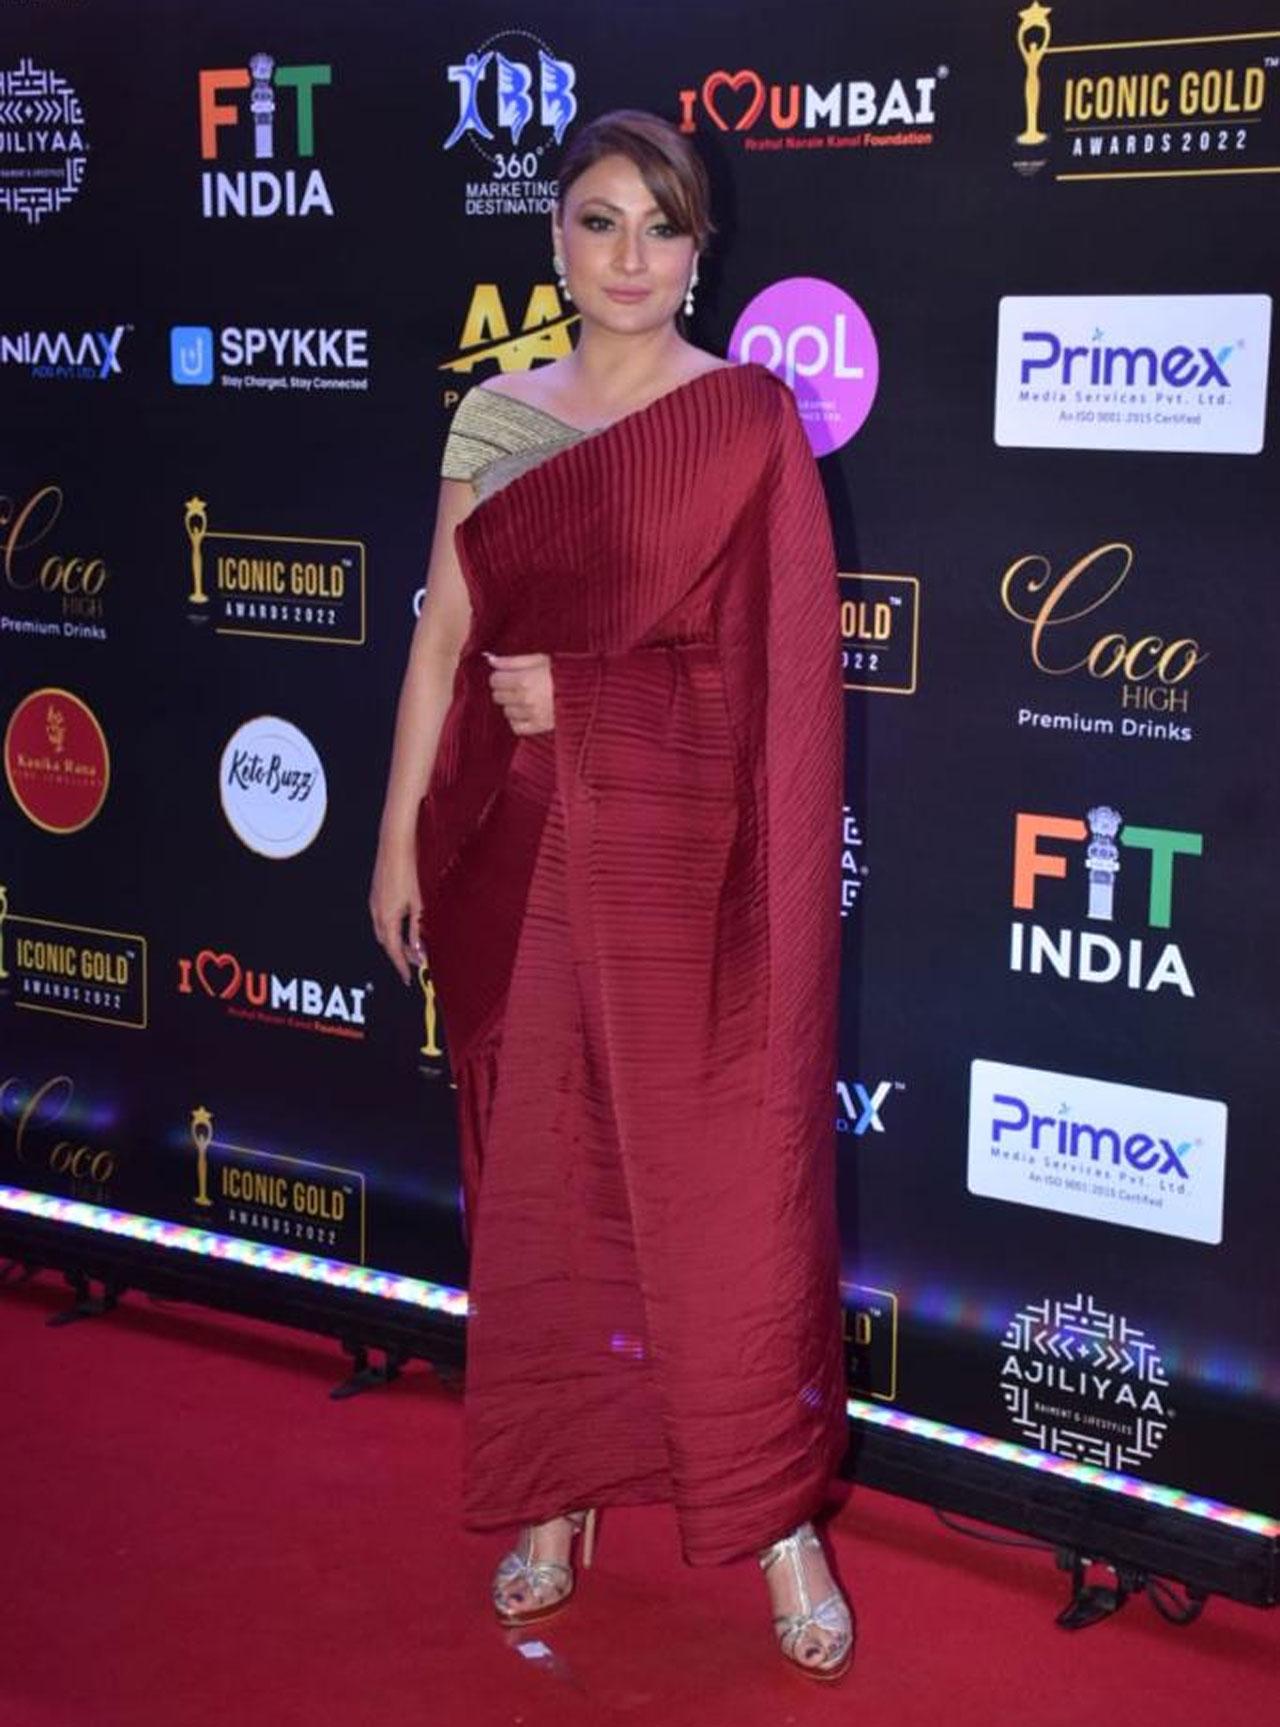 Urvashi Dholakia is one of the most iconic vamps on Indian Television, and that's exactly what she won an award for- The Iconic Best Negative TV Actress. She stunned in her outfit at the red carpet.